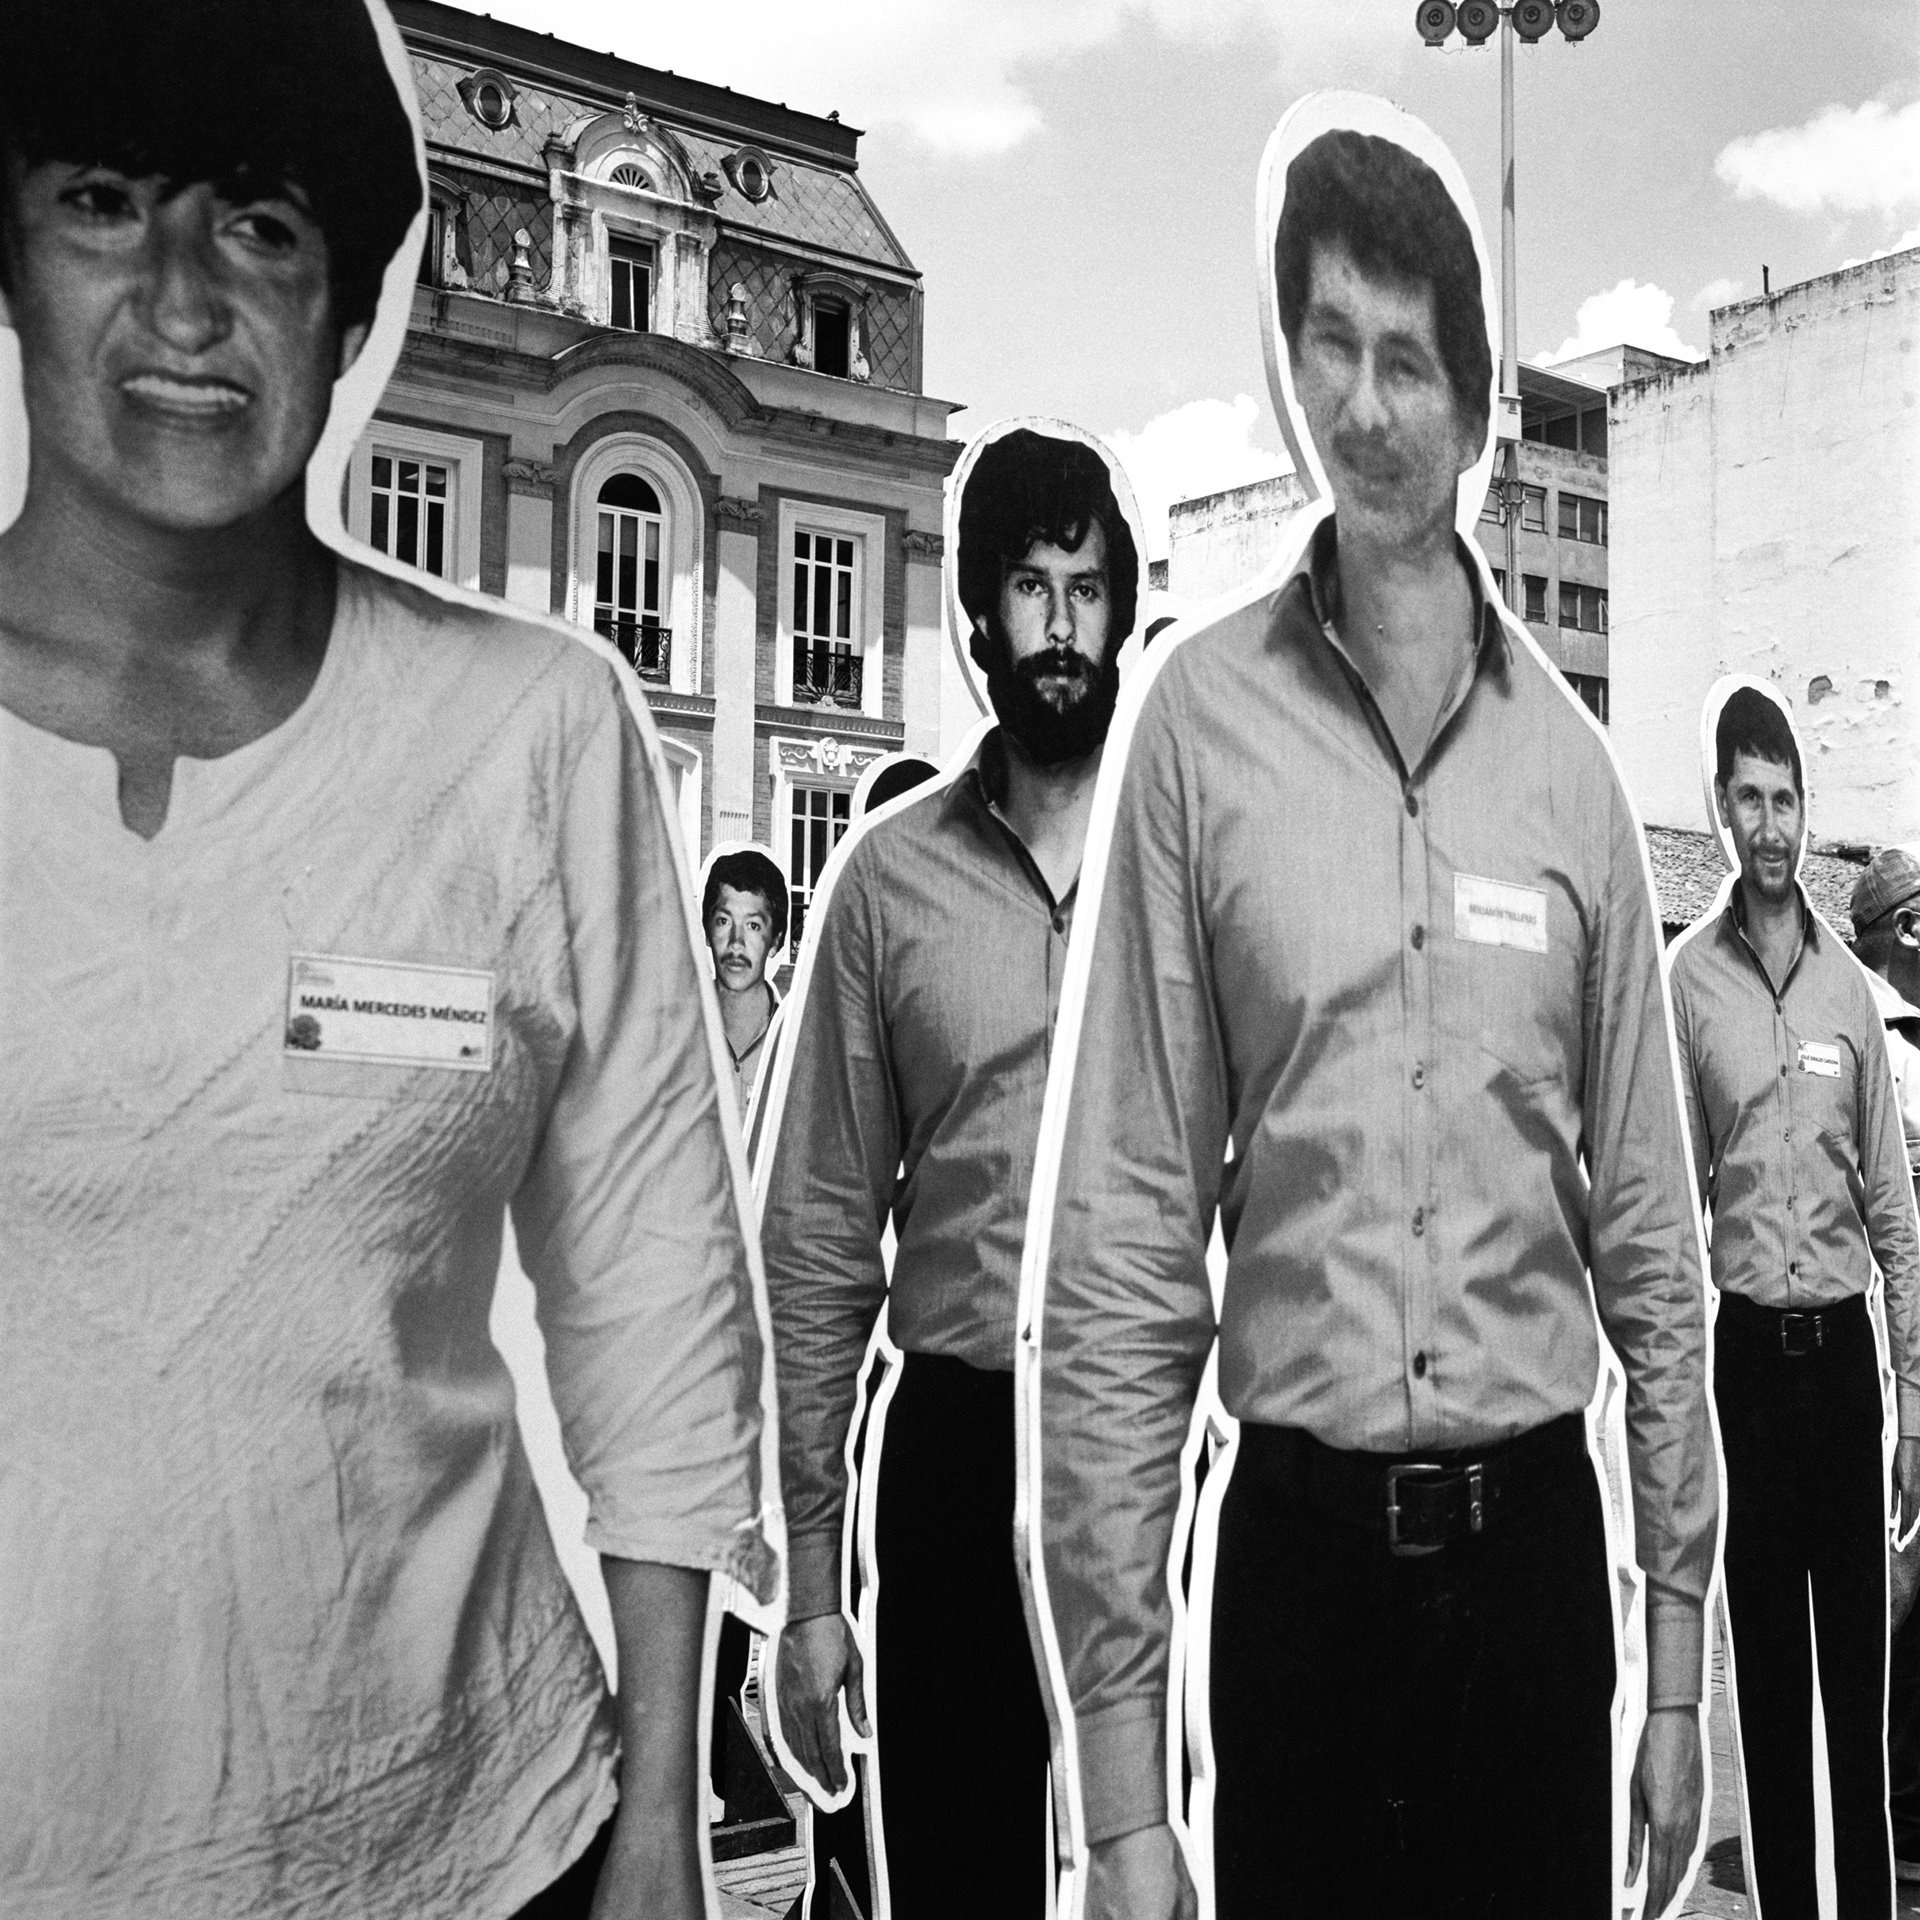 Photographic cutouts of disappeared members of the Patriotic Union (UP), a leftist political party founded by members of the Revolutionary Armed Forces of Colombia (FARC) and the Colombian Communist Party, stand in the Plaza de Bolívar in Bogotá, Colombia. During the 1980s, the party&rsquo;s leadership and members were subject to violent attack and assassinations, seemingly carried out with political motives by drug lords, paramilitary groups, and some members of the government&#39;s armed forces. Well over 5,000 people were killed, in what is now widely considered to be a case of genocide. While some investigations were opened and some perpetrators convicted, most of the murders were never solved.